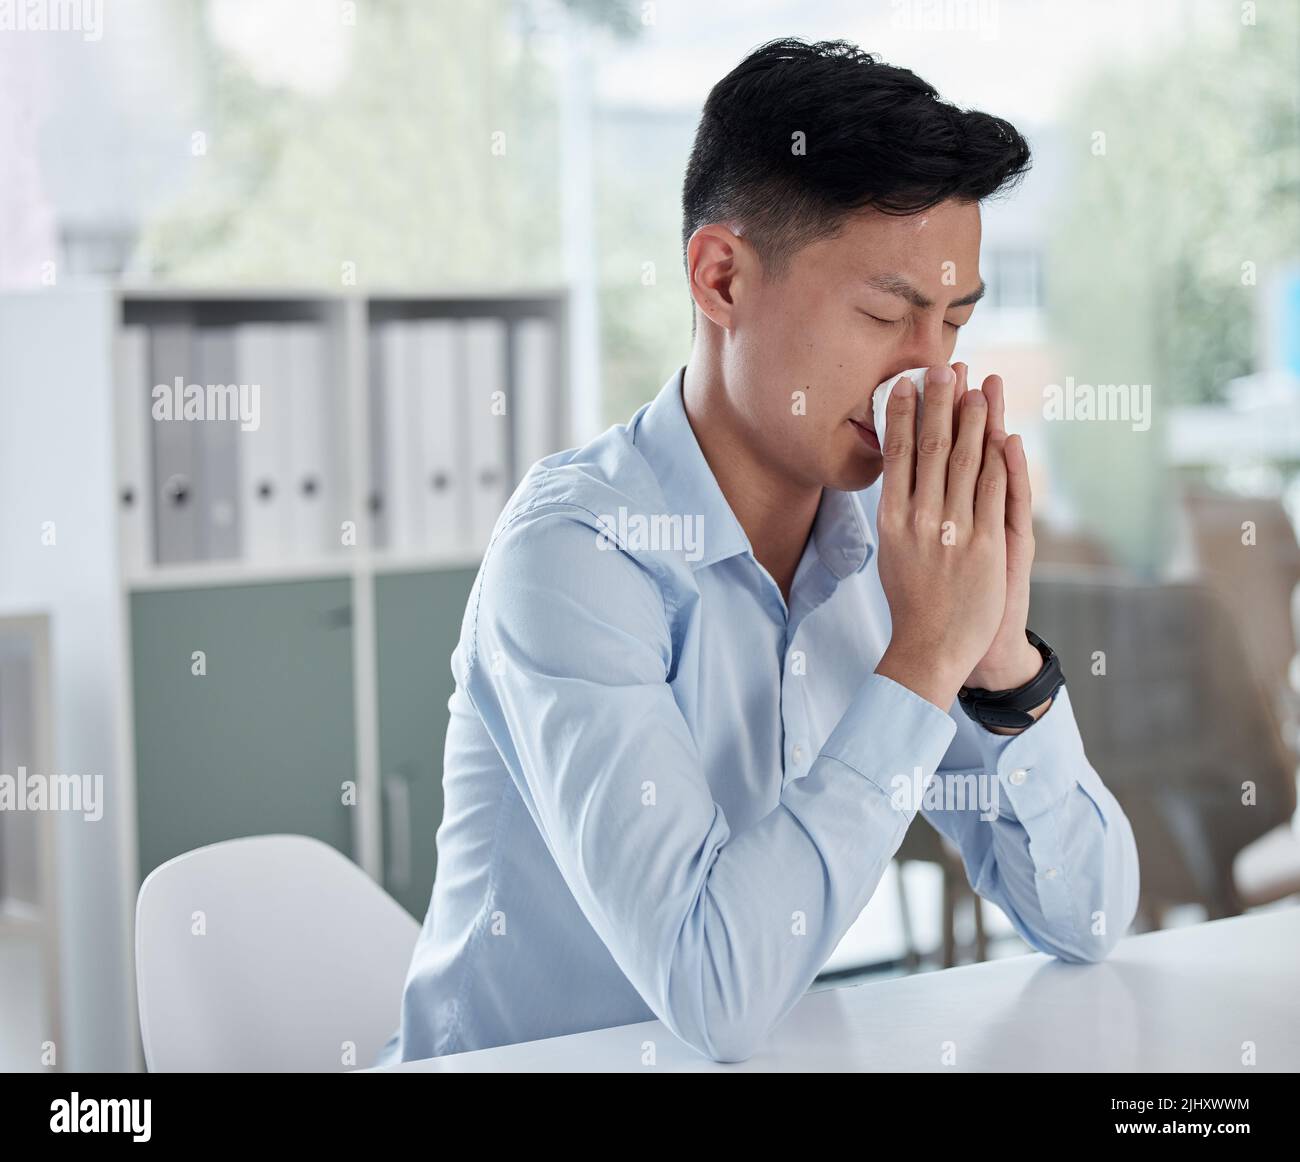 A sick businessman using a tissue and blowing his nose while working in a modern office. An ill asian man ill with flu, a cold or covid. Male employee Stock Photo